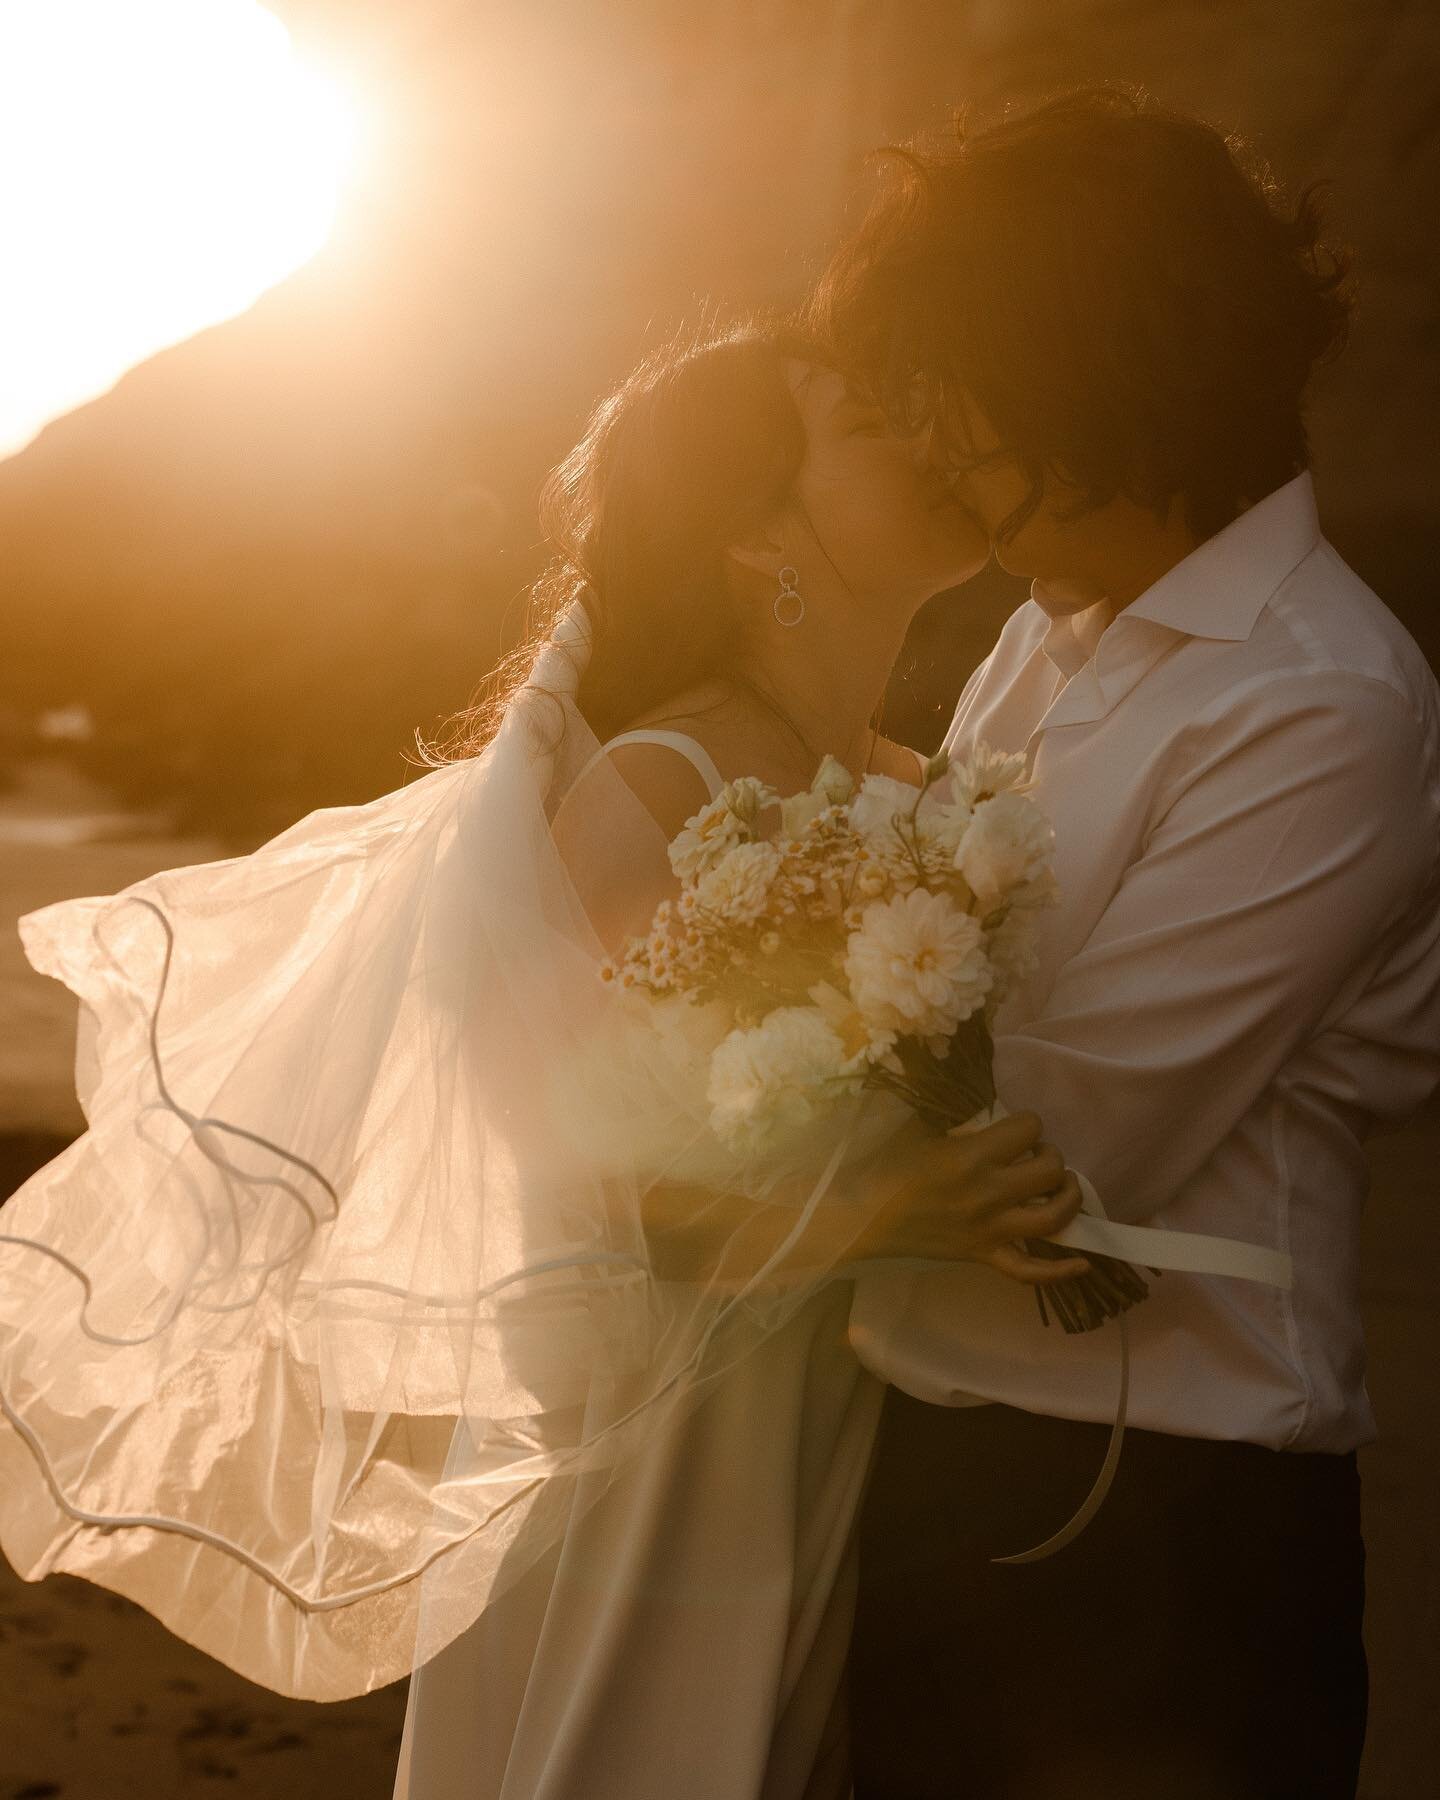 H + C at Muriwai. 
Thank you everyone for your patience waiting your galleries. It has been a very busy time for me.
.
.
.
#muriwaibeach #weddingsunset #modernbride #shortweddingdress